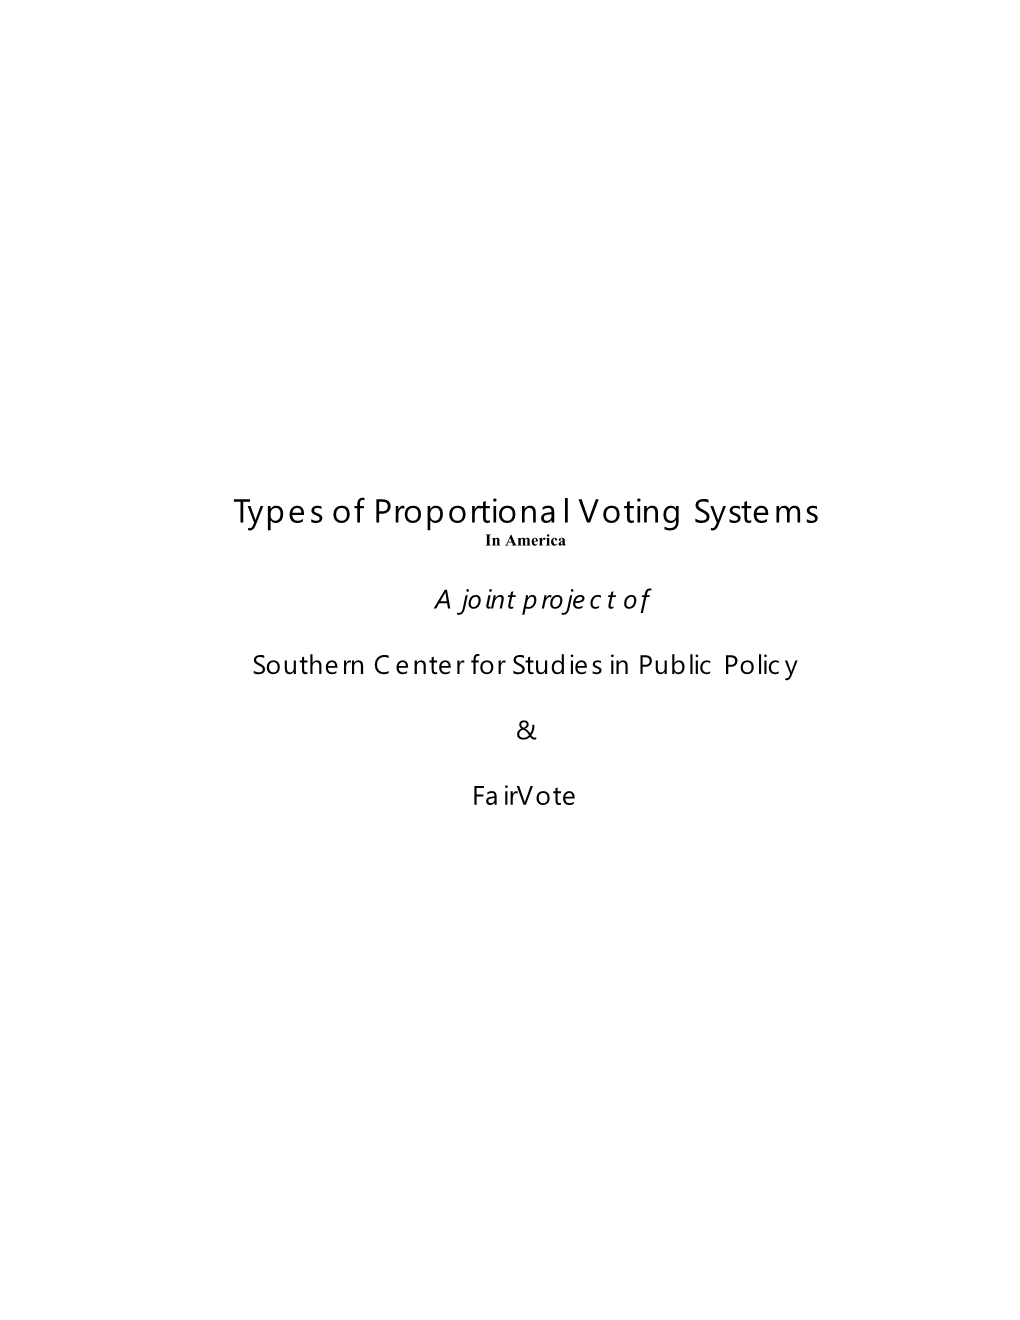 Types of Proportional Voting Systems in America